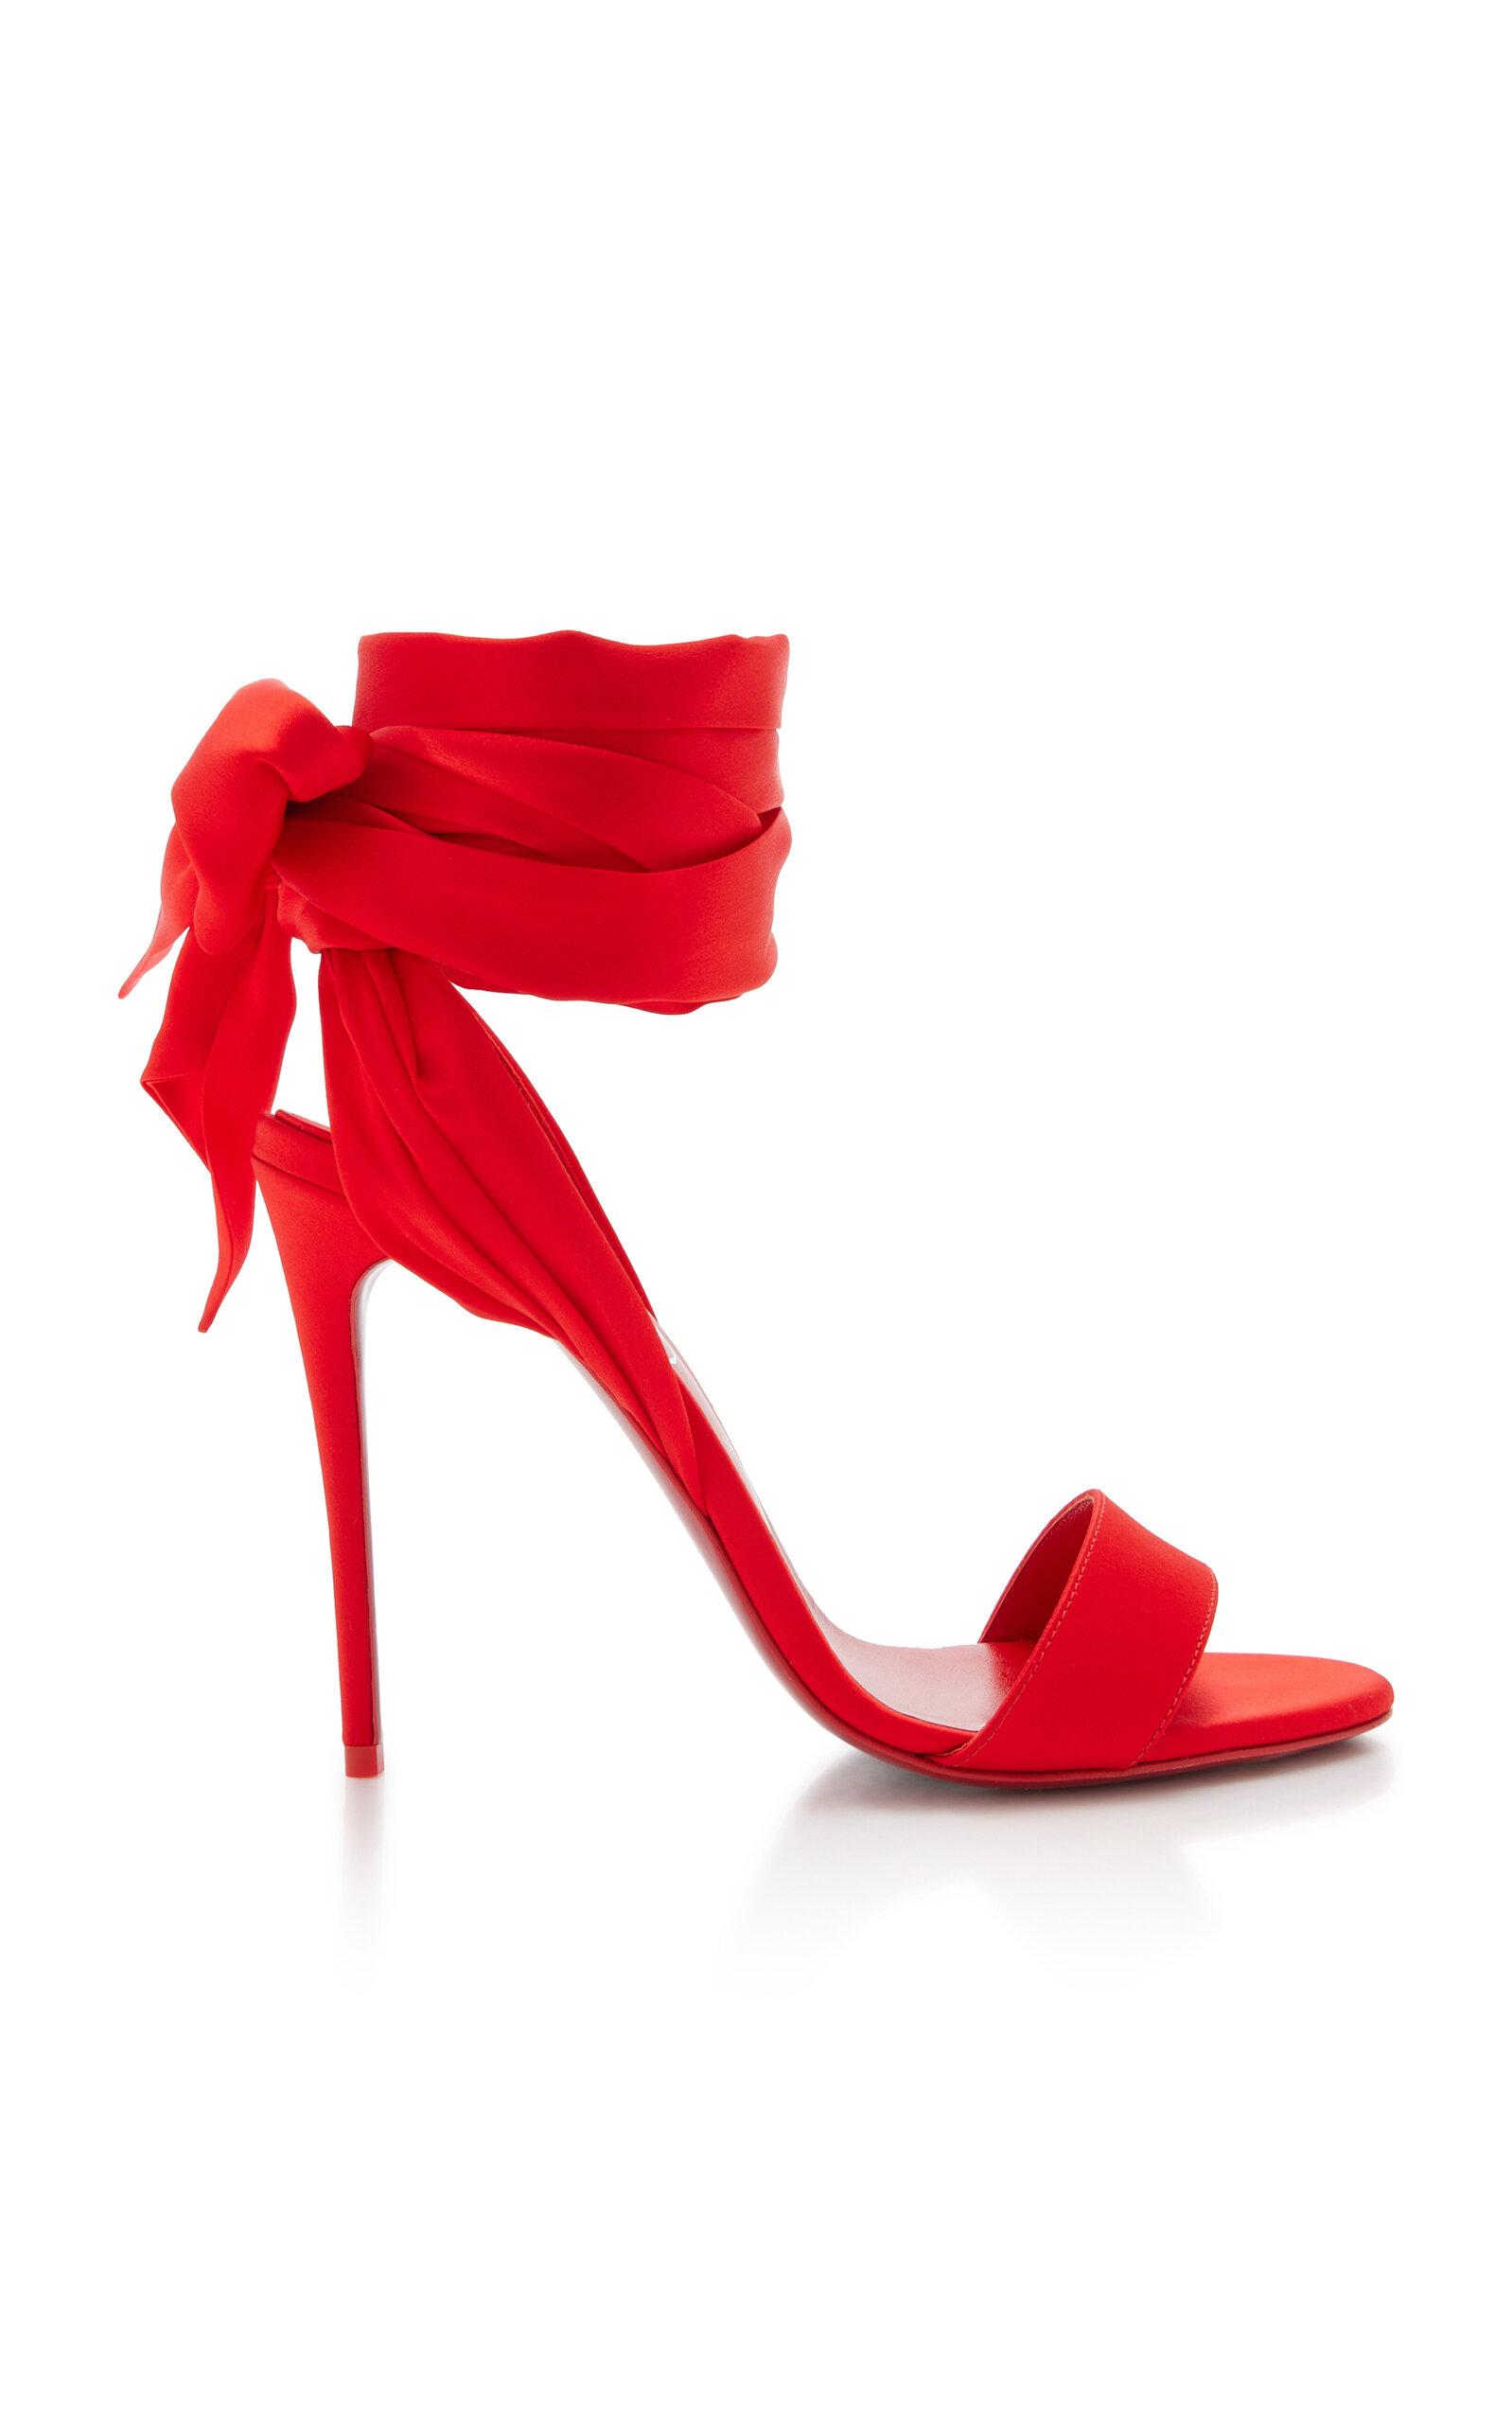 Christian Louboutin Desert 100mm Satin Sandals in Red | Lyst Canada